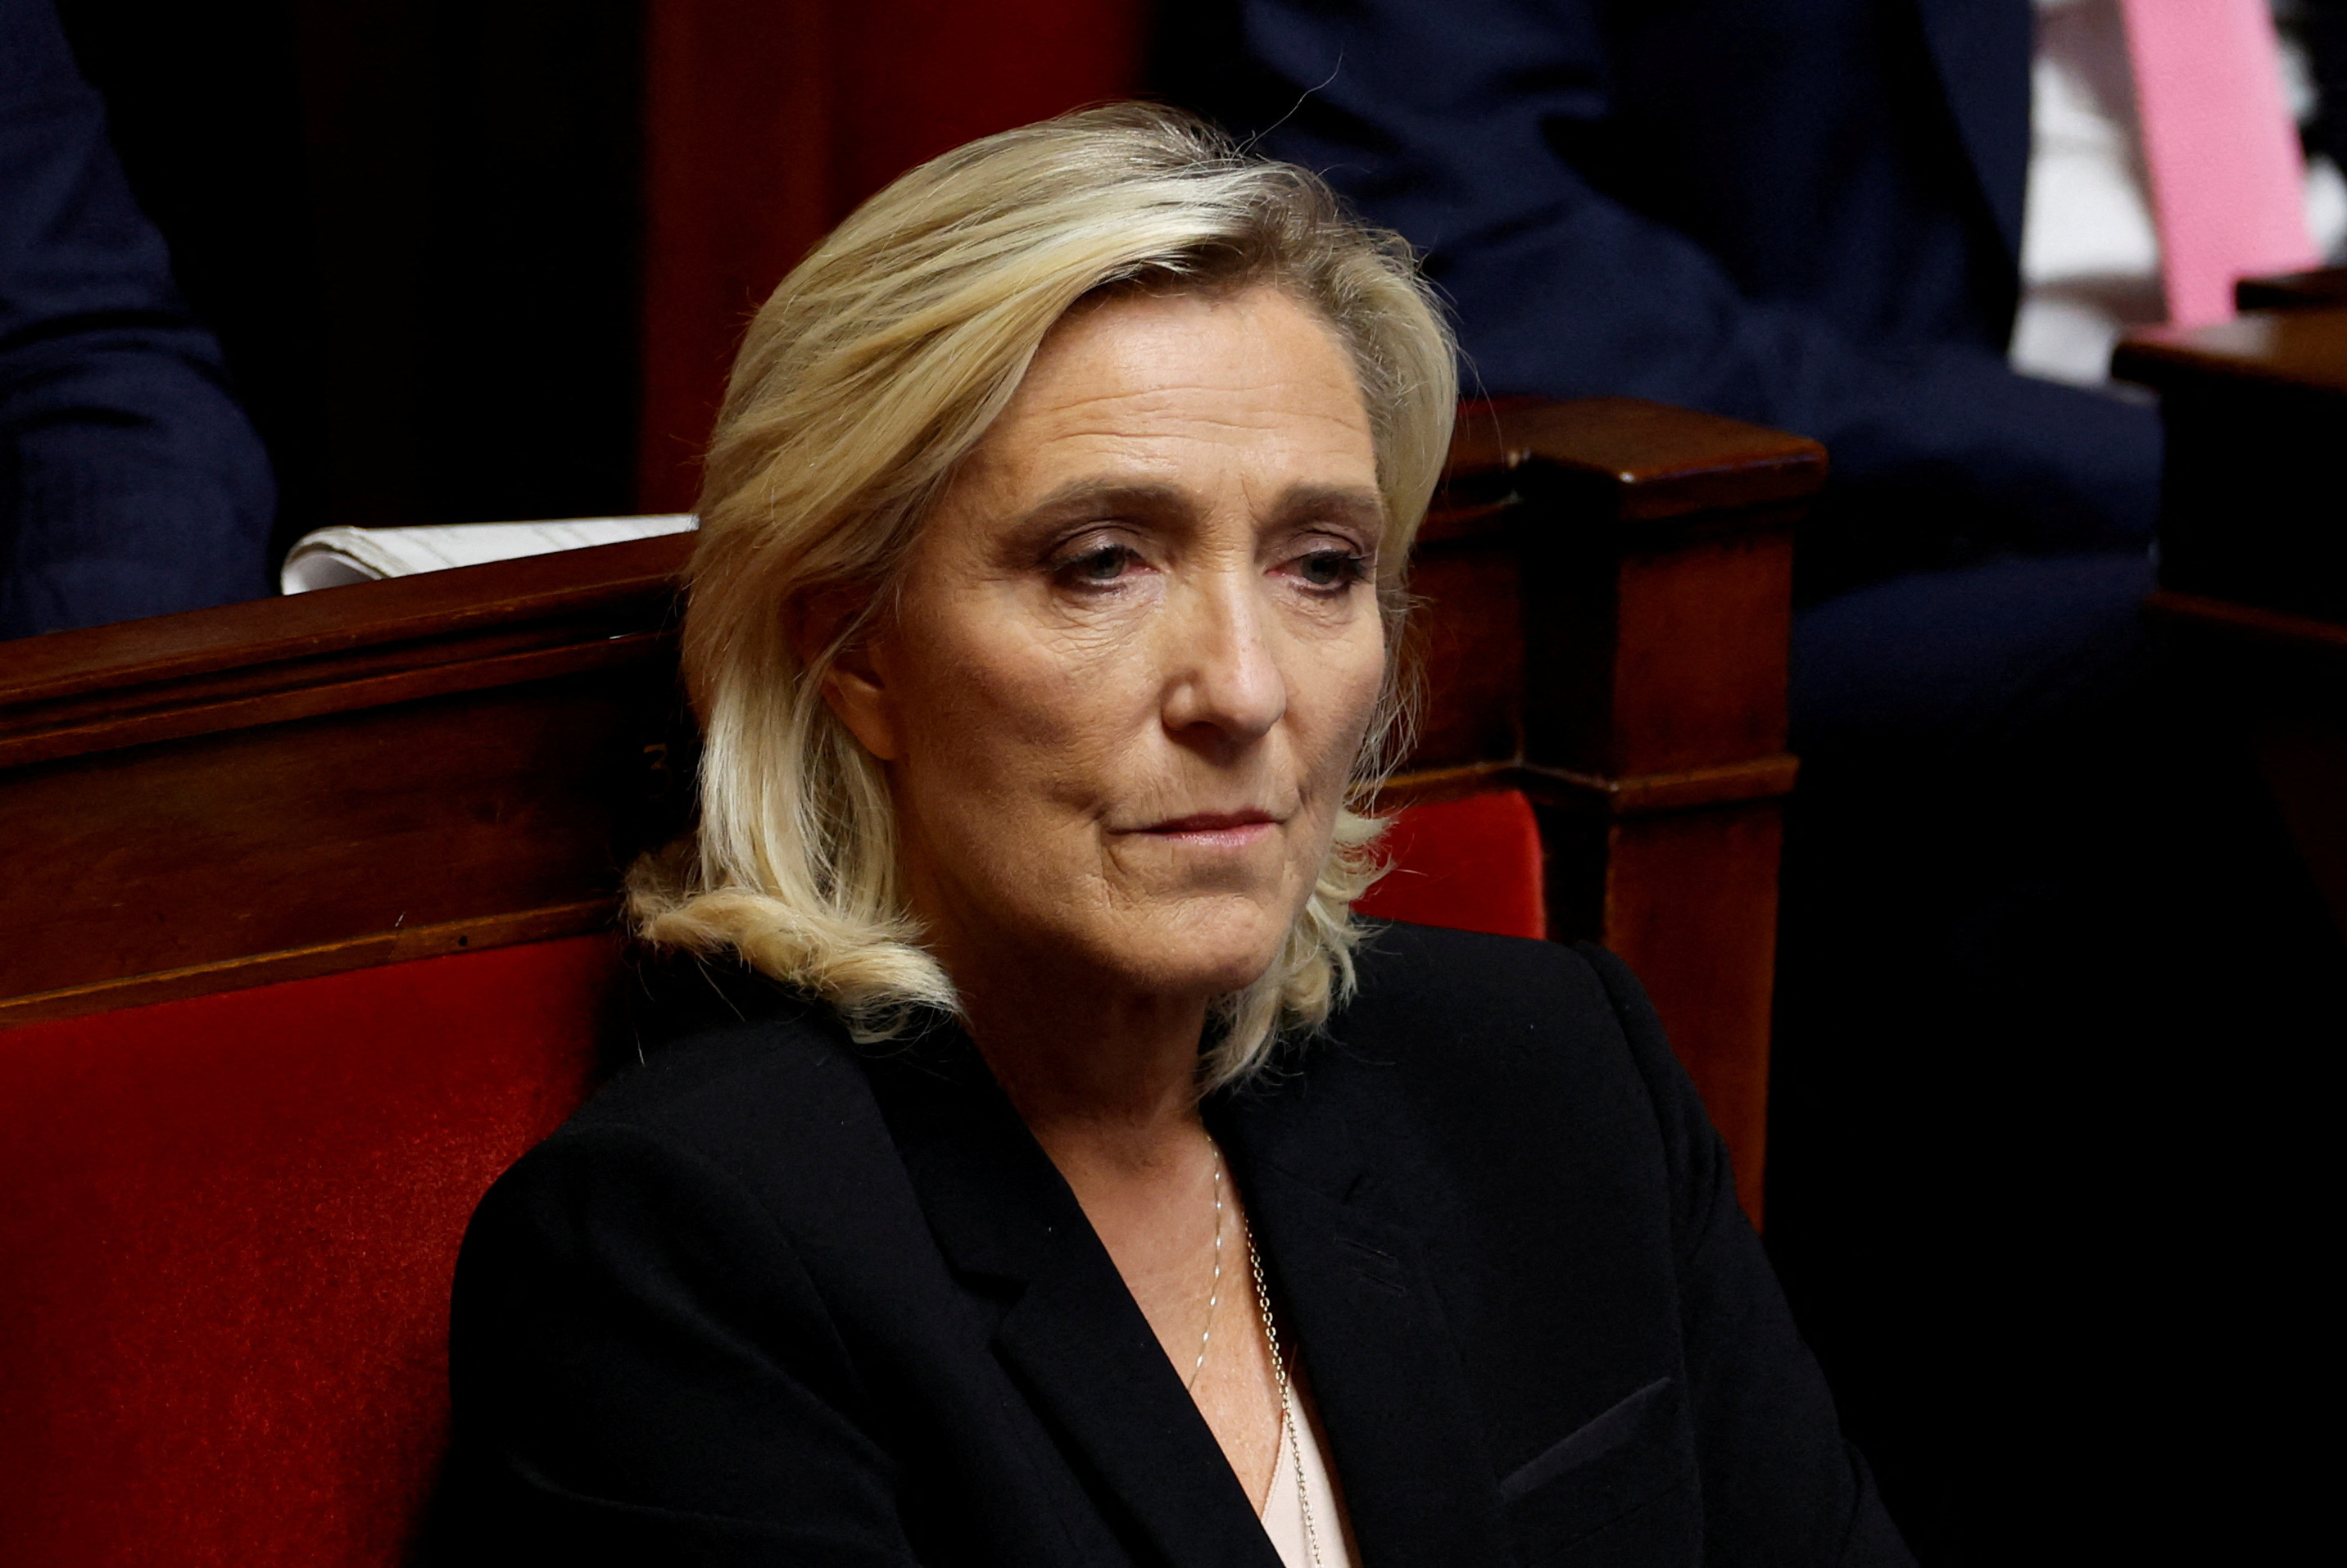 France's Le Pen says Wilders election upset gives hope to Europe